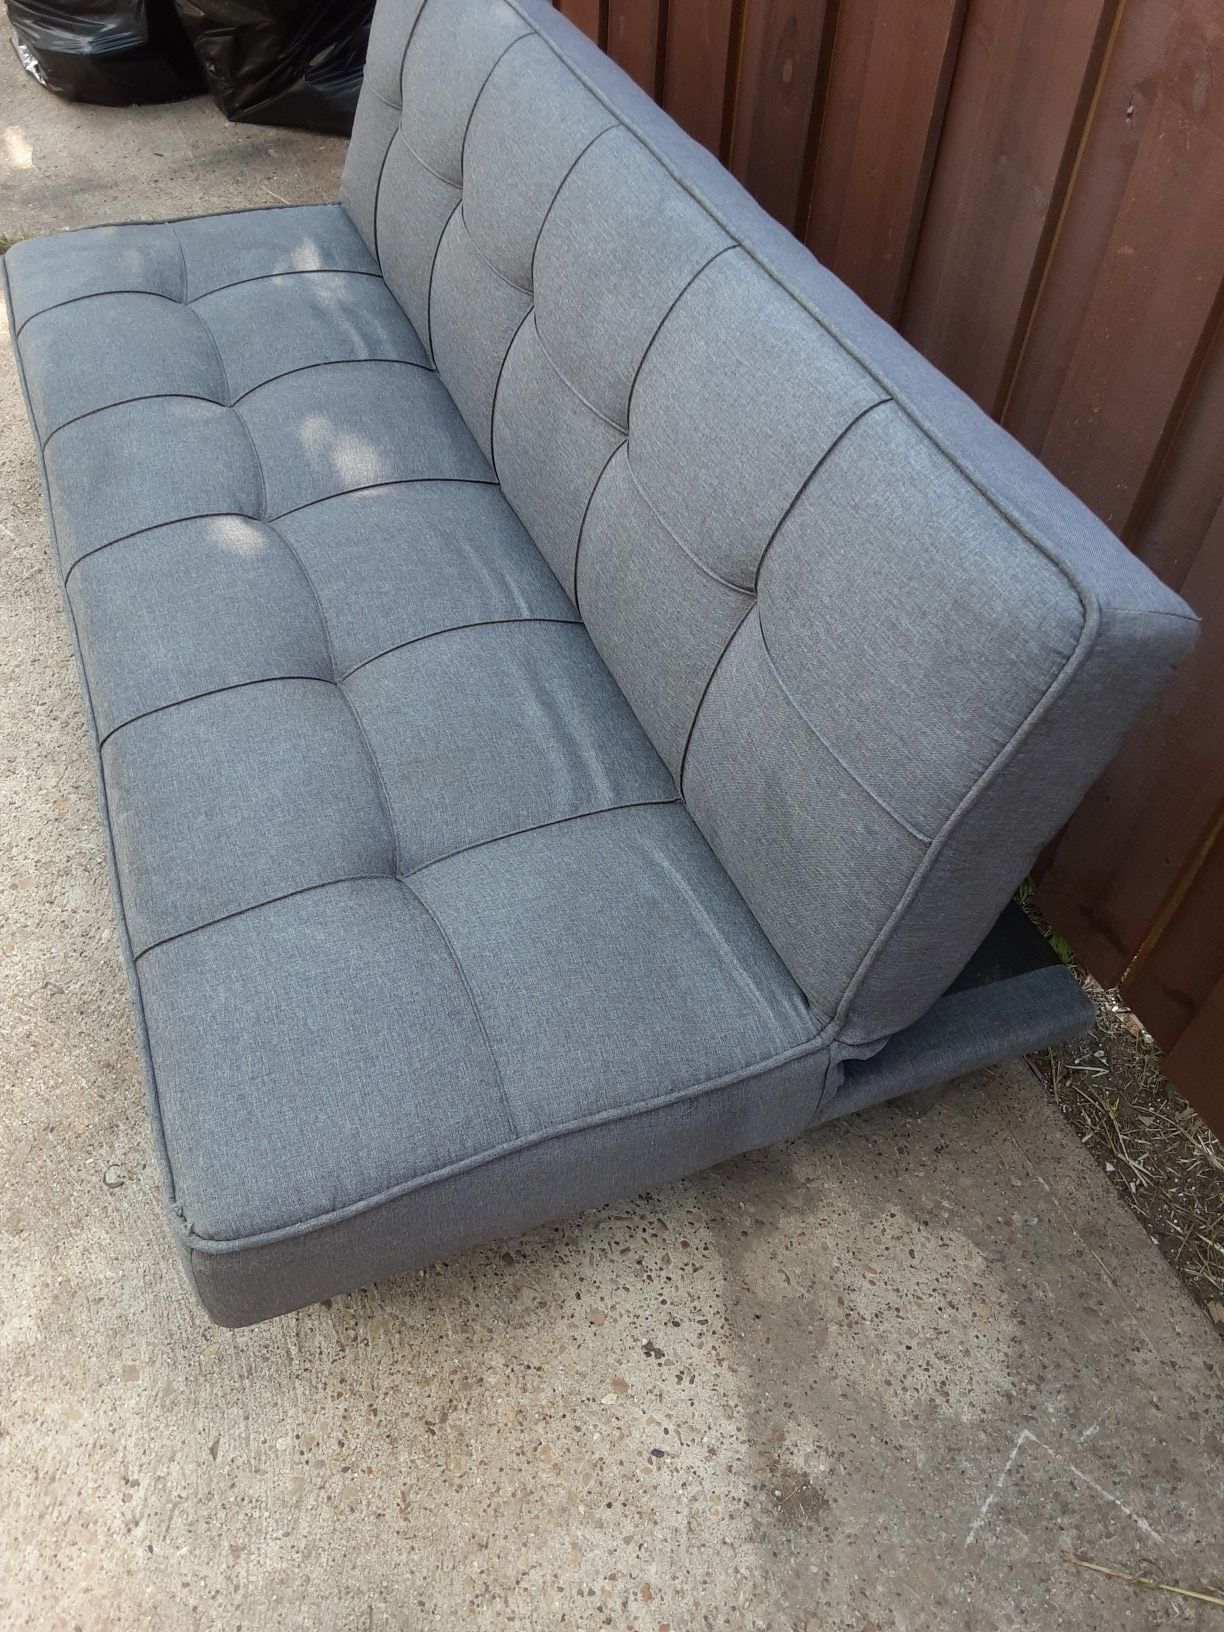 Tufted Gray Futon (adjustable back)$100.00 cashonly (serious buyers)